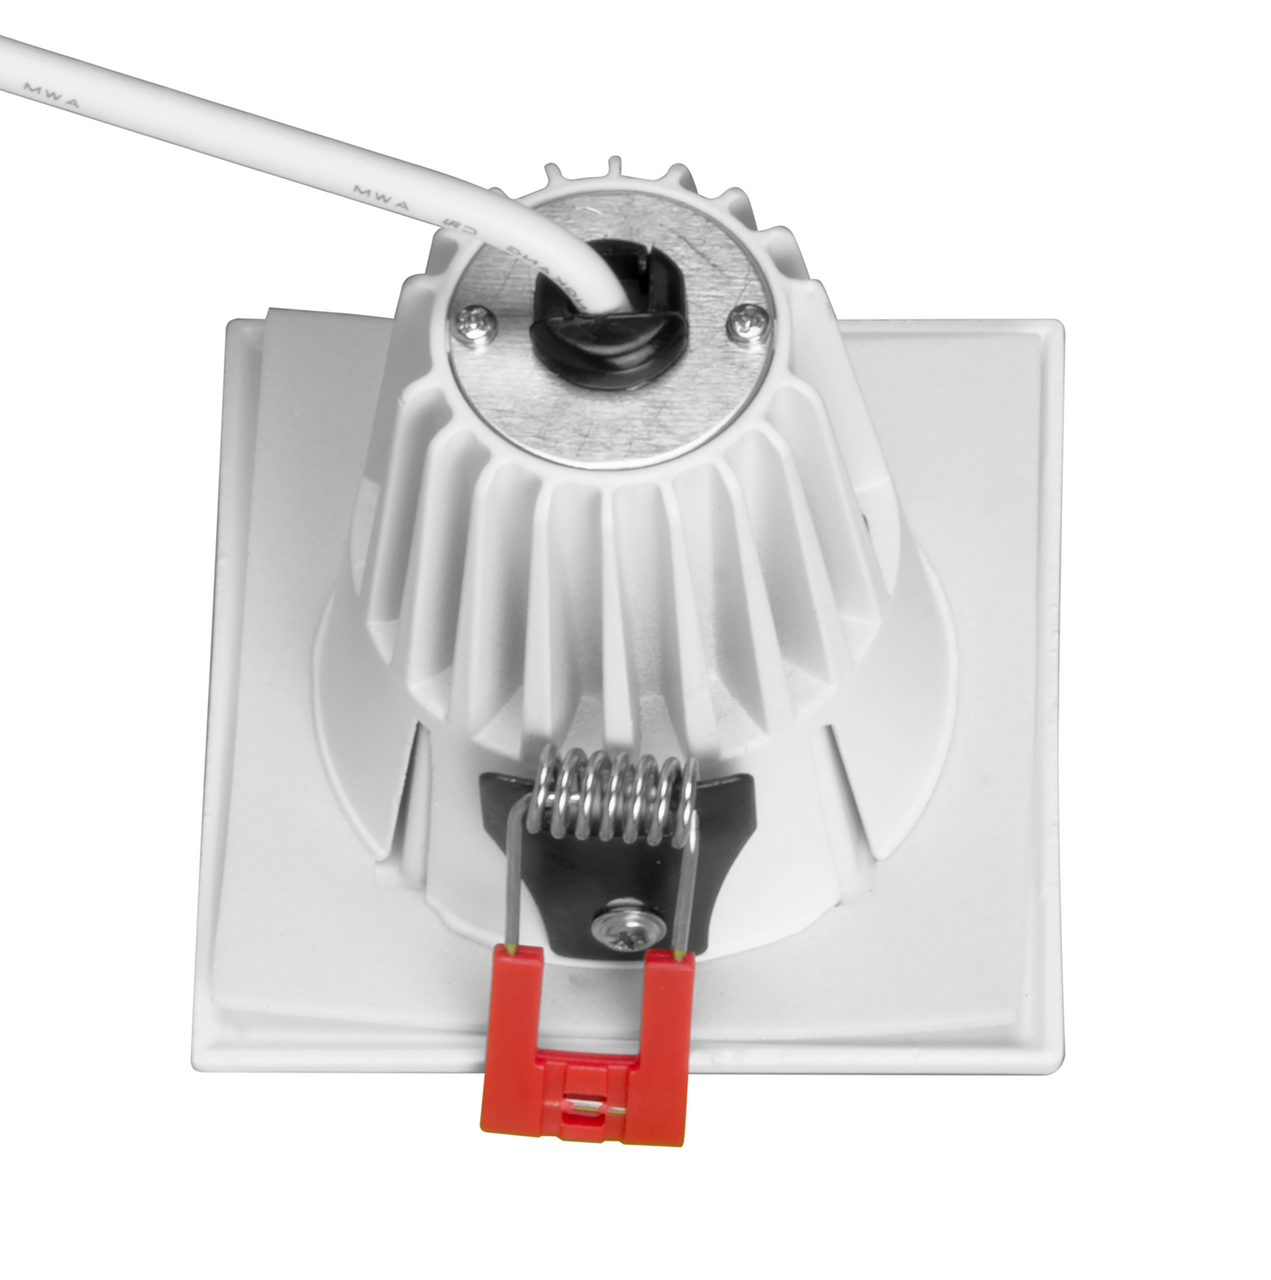 NICOR DQD211202KWHBF 2-inch Square LED Recessed Downlight with Baffle in White, 2700K